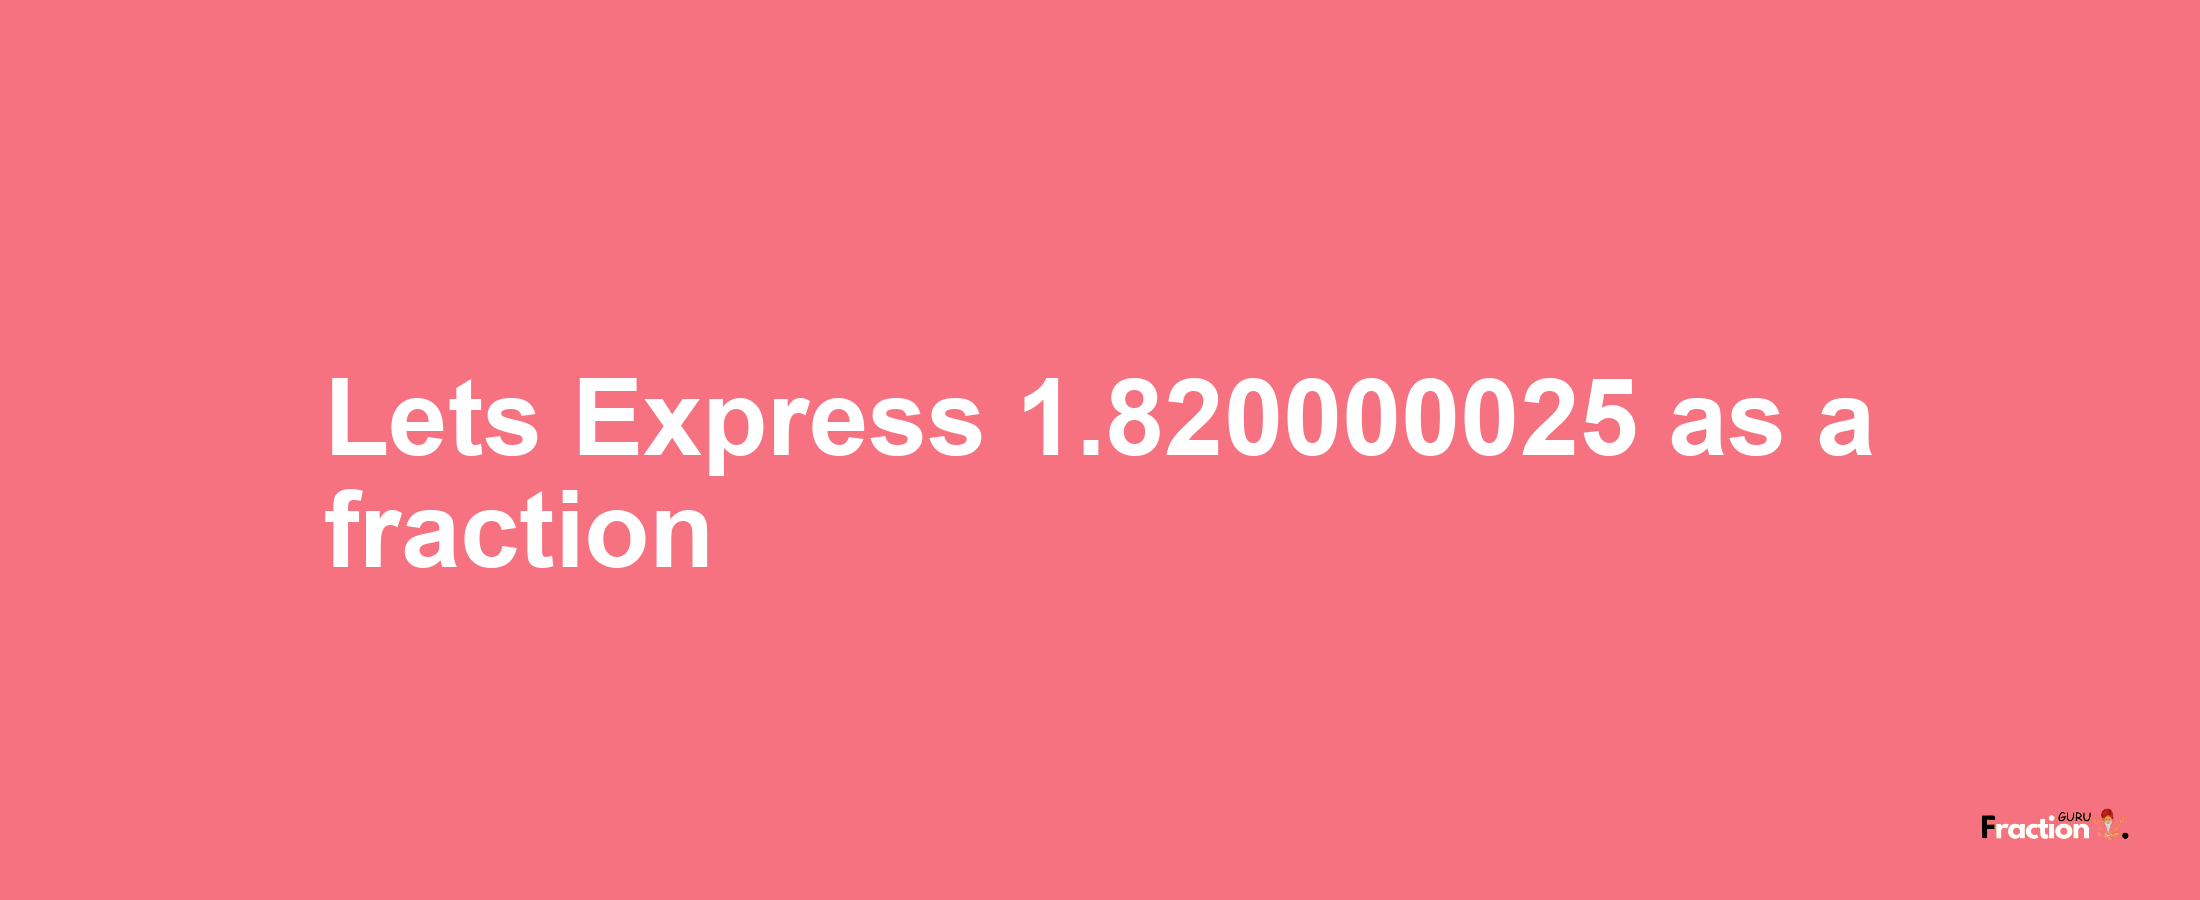 Lets Express 1.820000025 as afraction